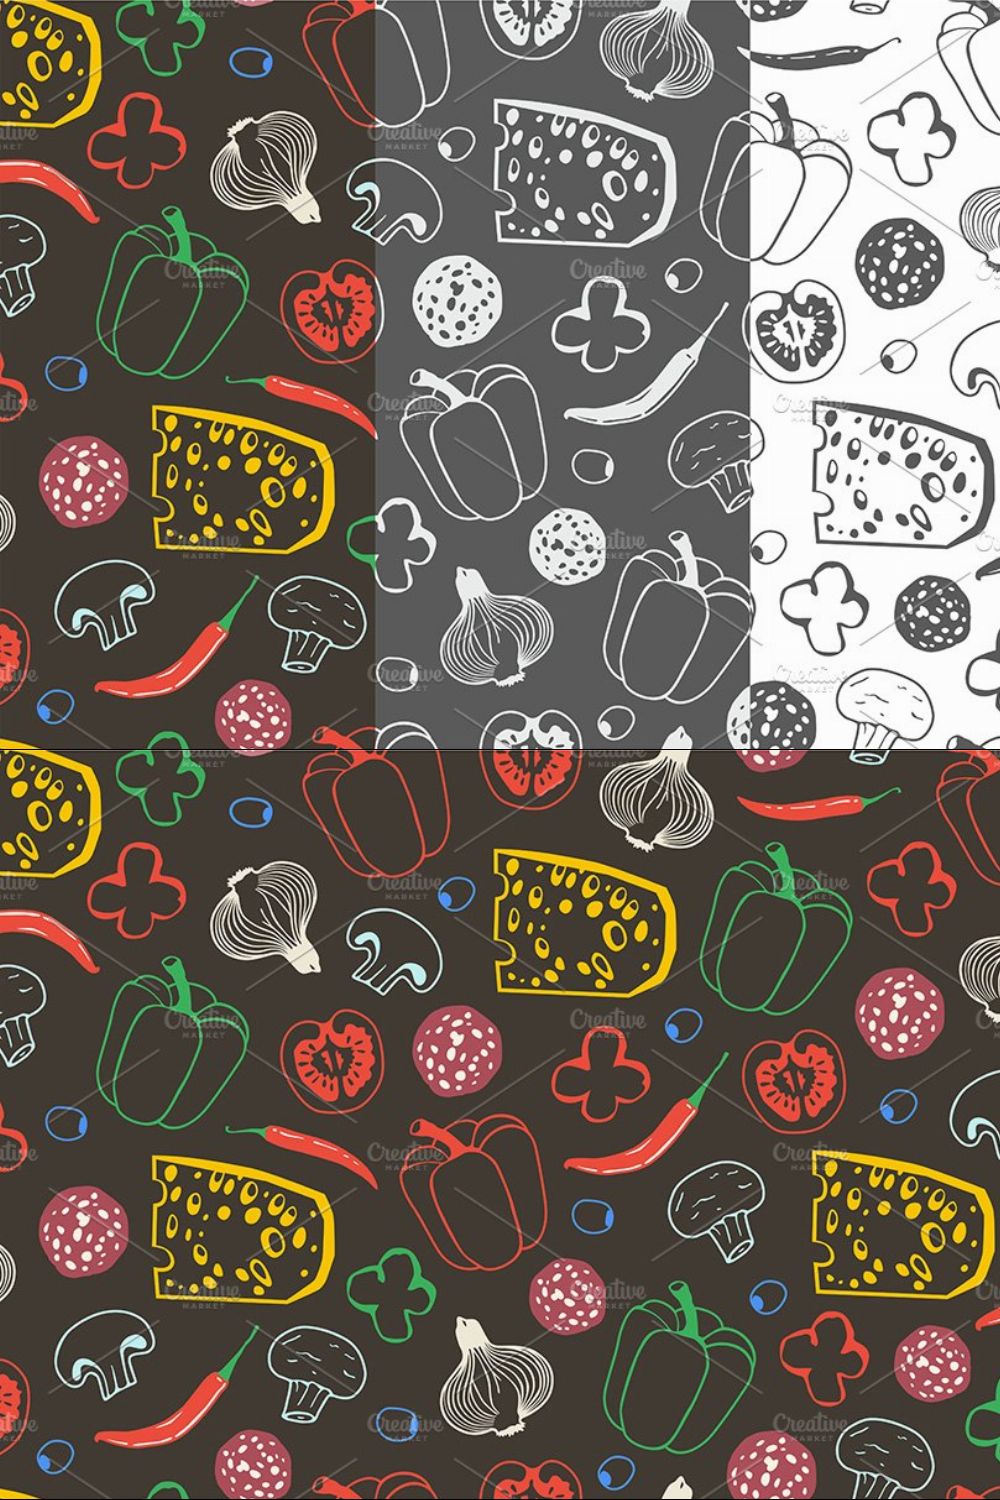 pattern ingredients for pizza pinterest preview image.